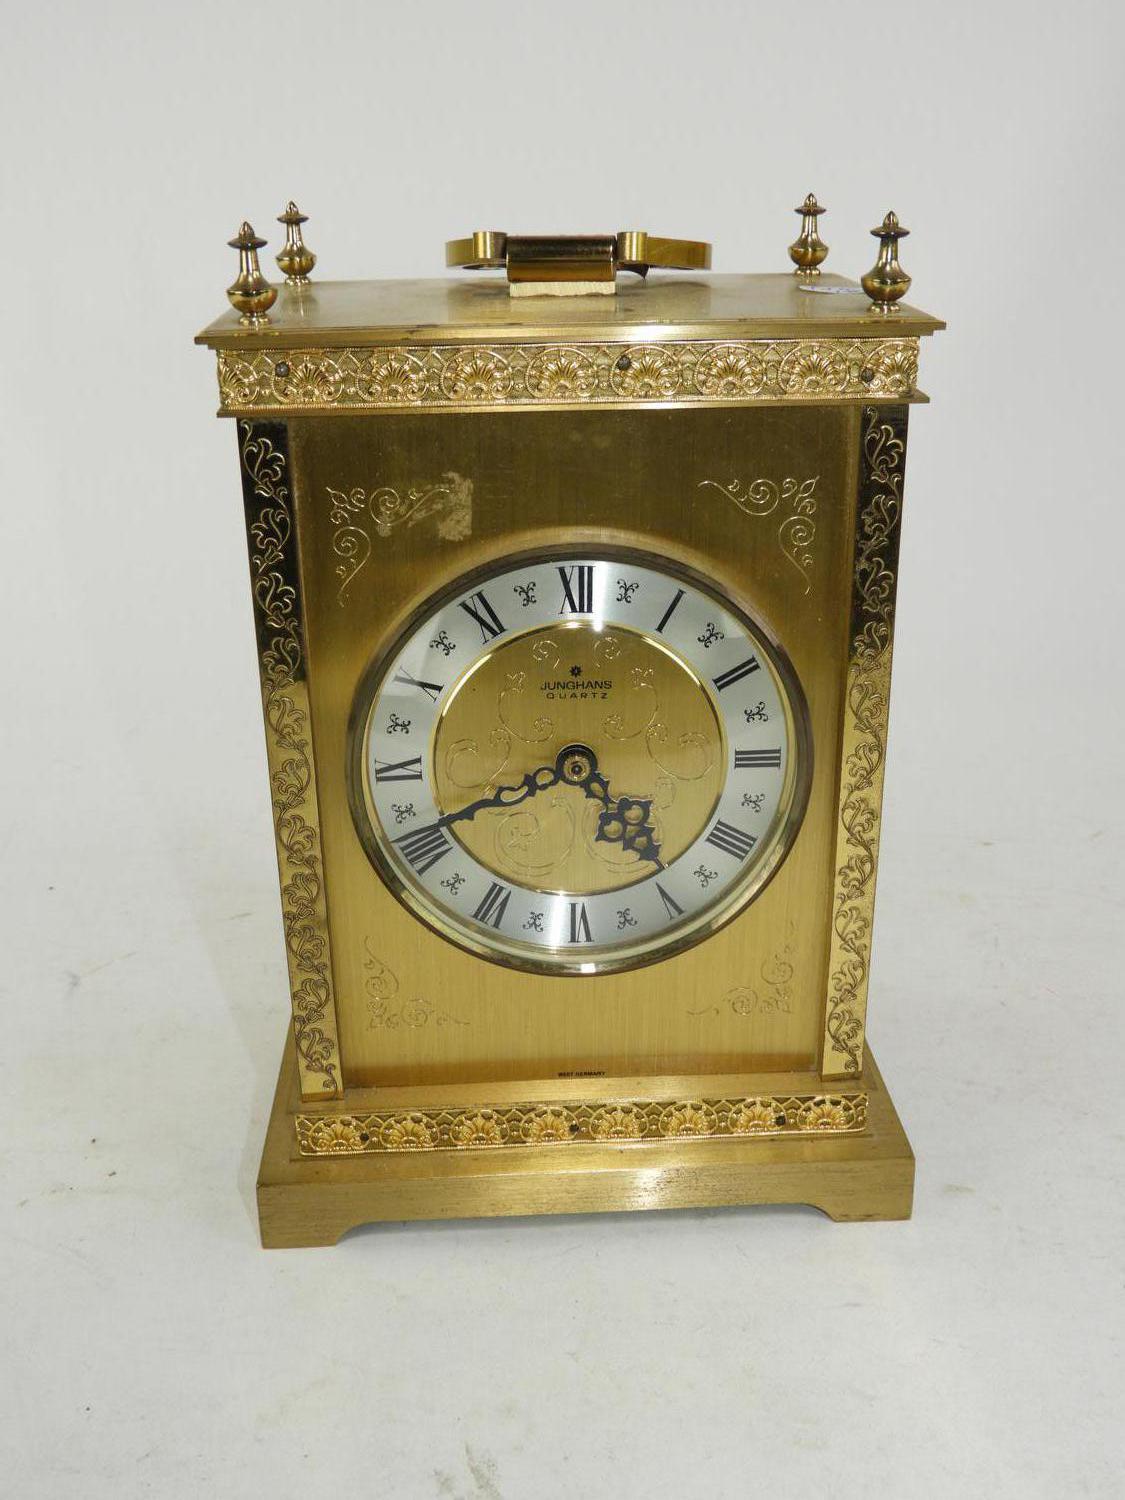 Murrays Auctioneers - Lot 420: Junghans brass carriage clock, ht. 10